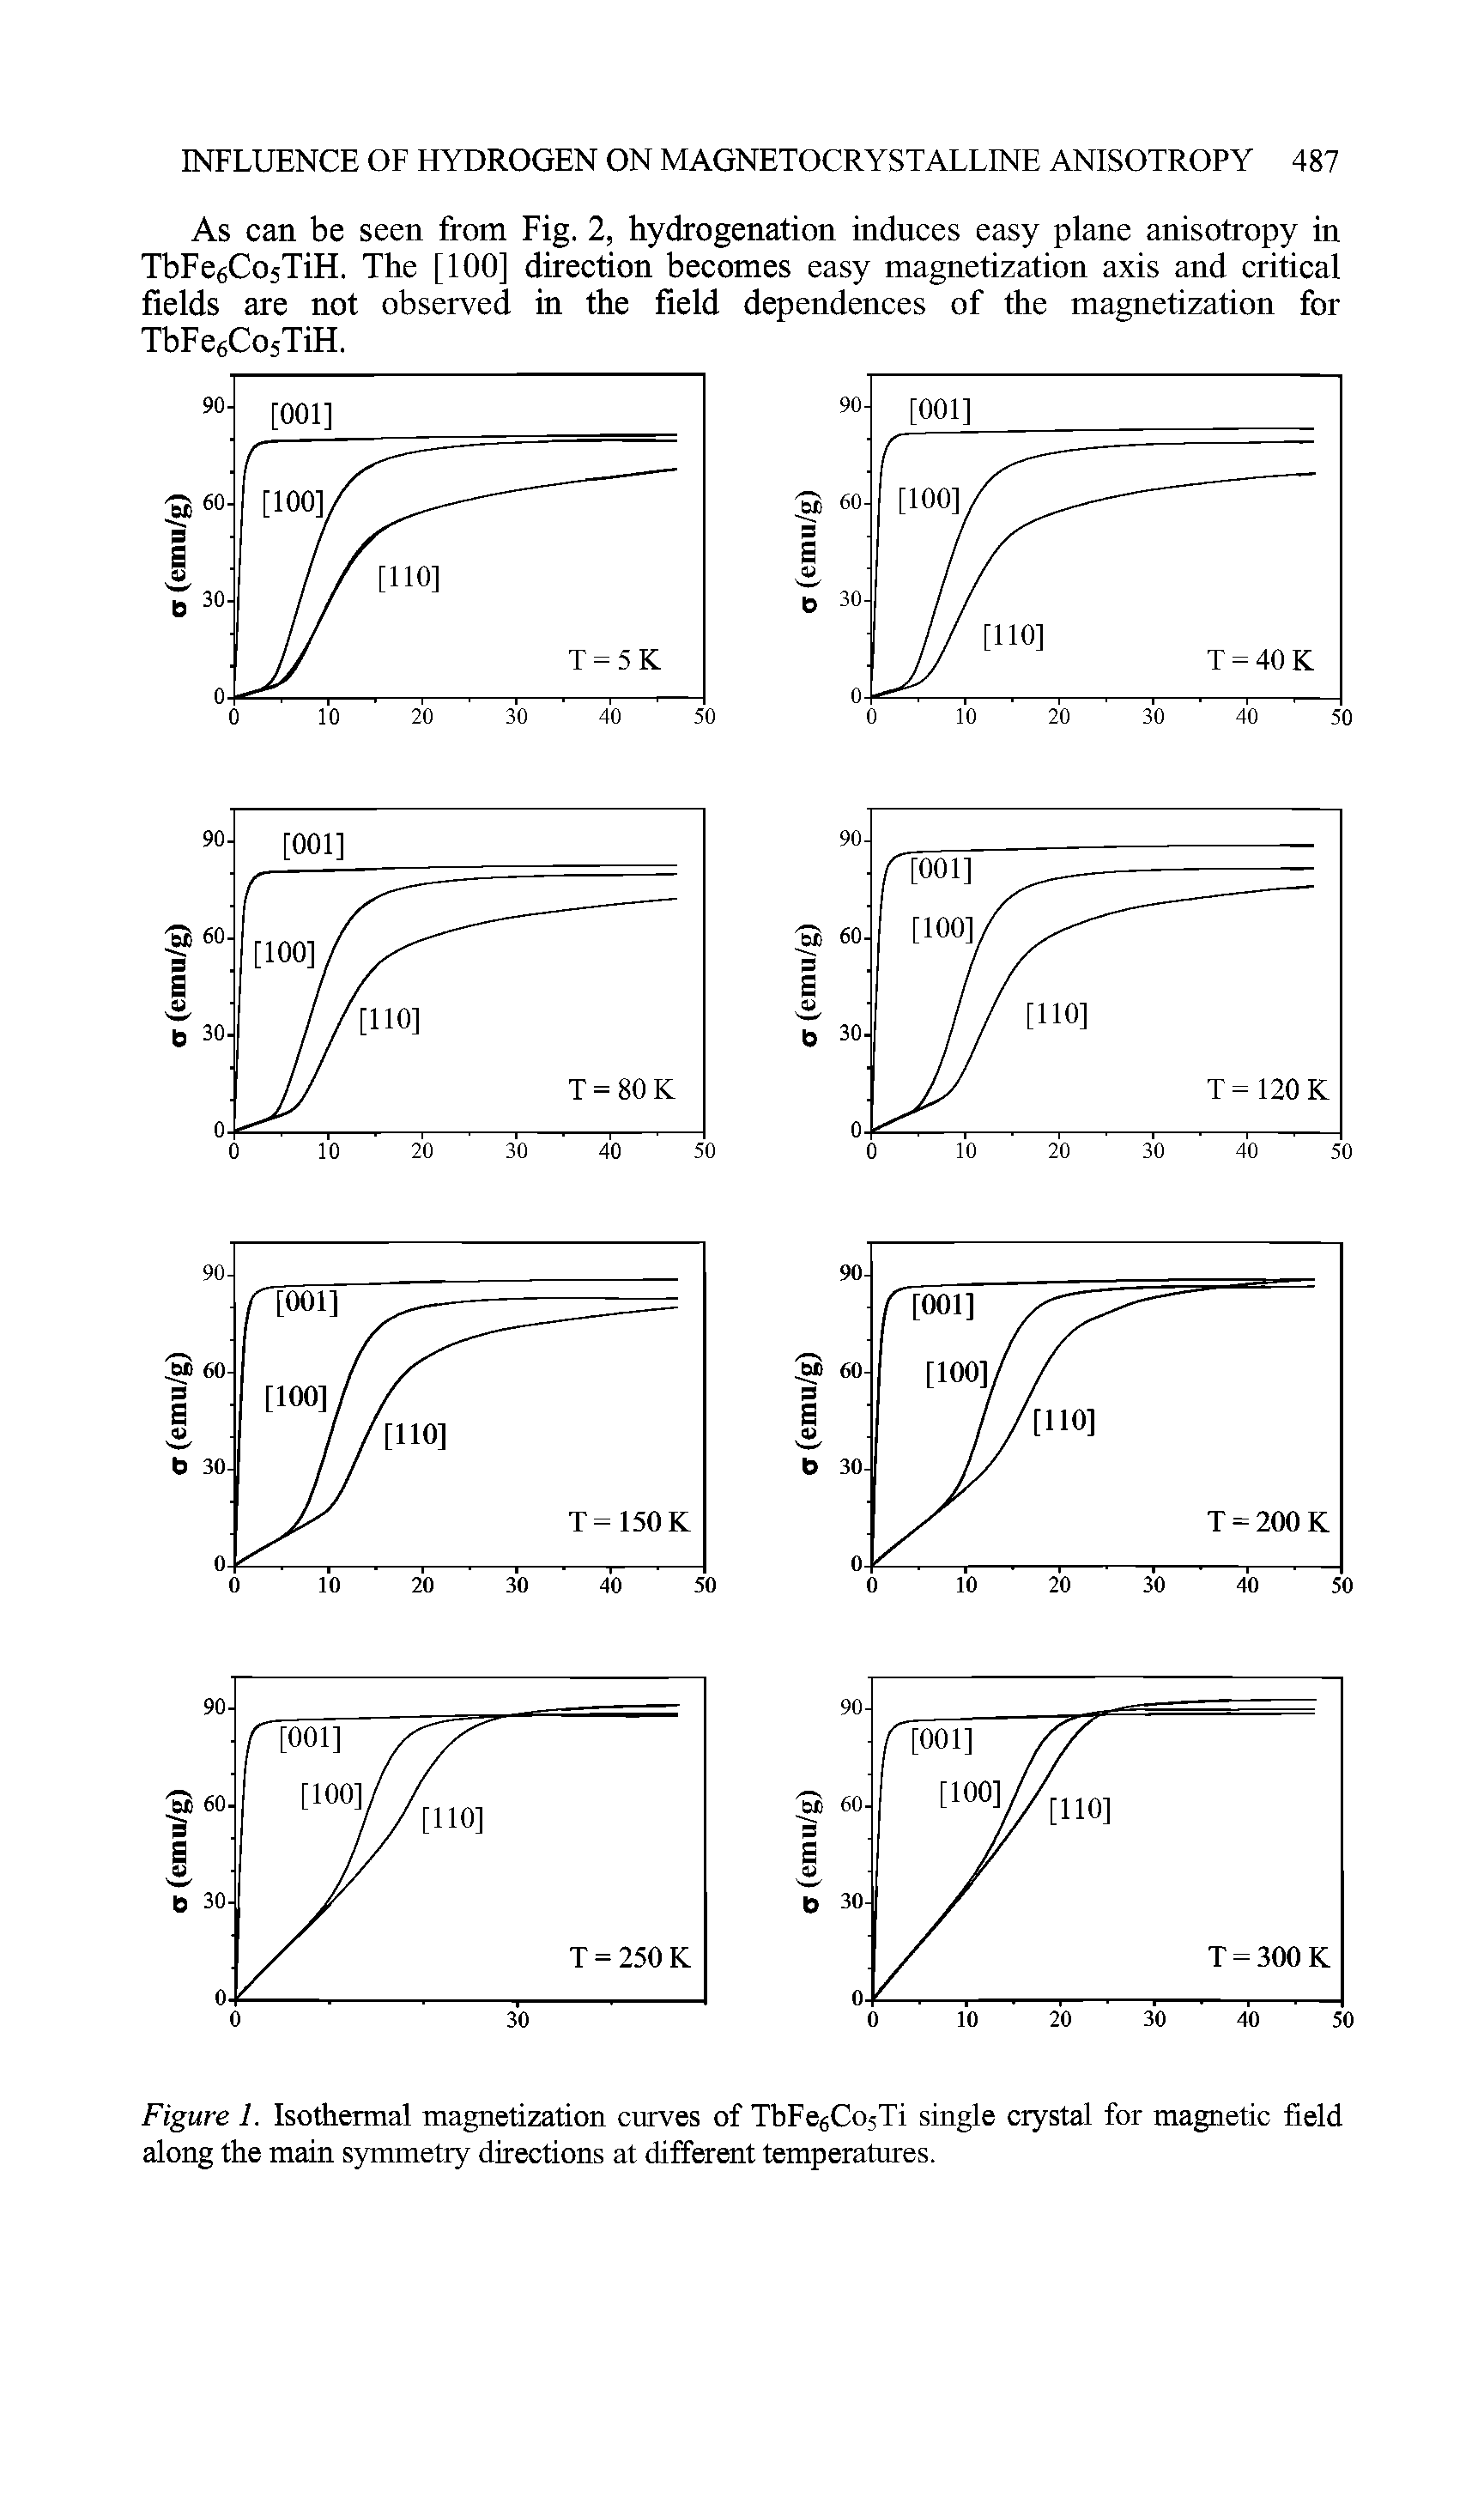 Figure 1. Isothermal magnetization curves of TbFe6Co5Ti single crystal for magnetic field along the main symmetry directions at different temperatures.